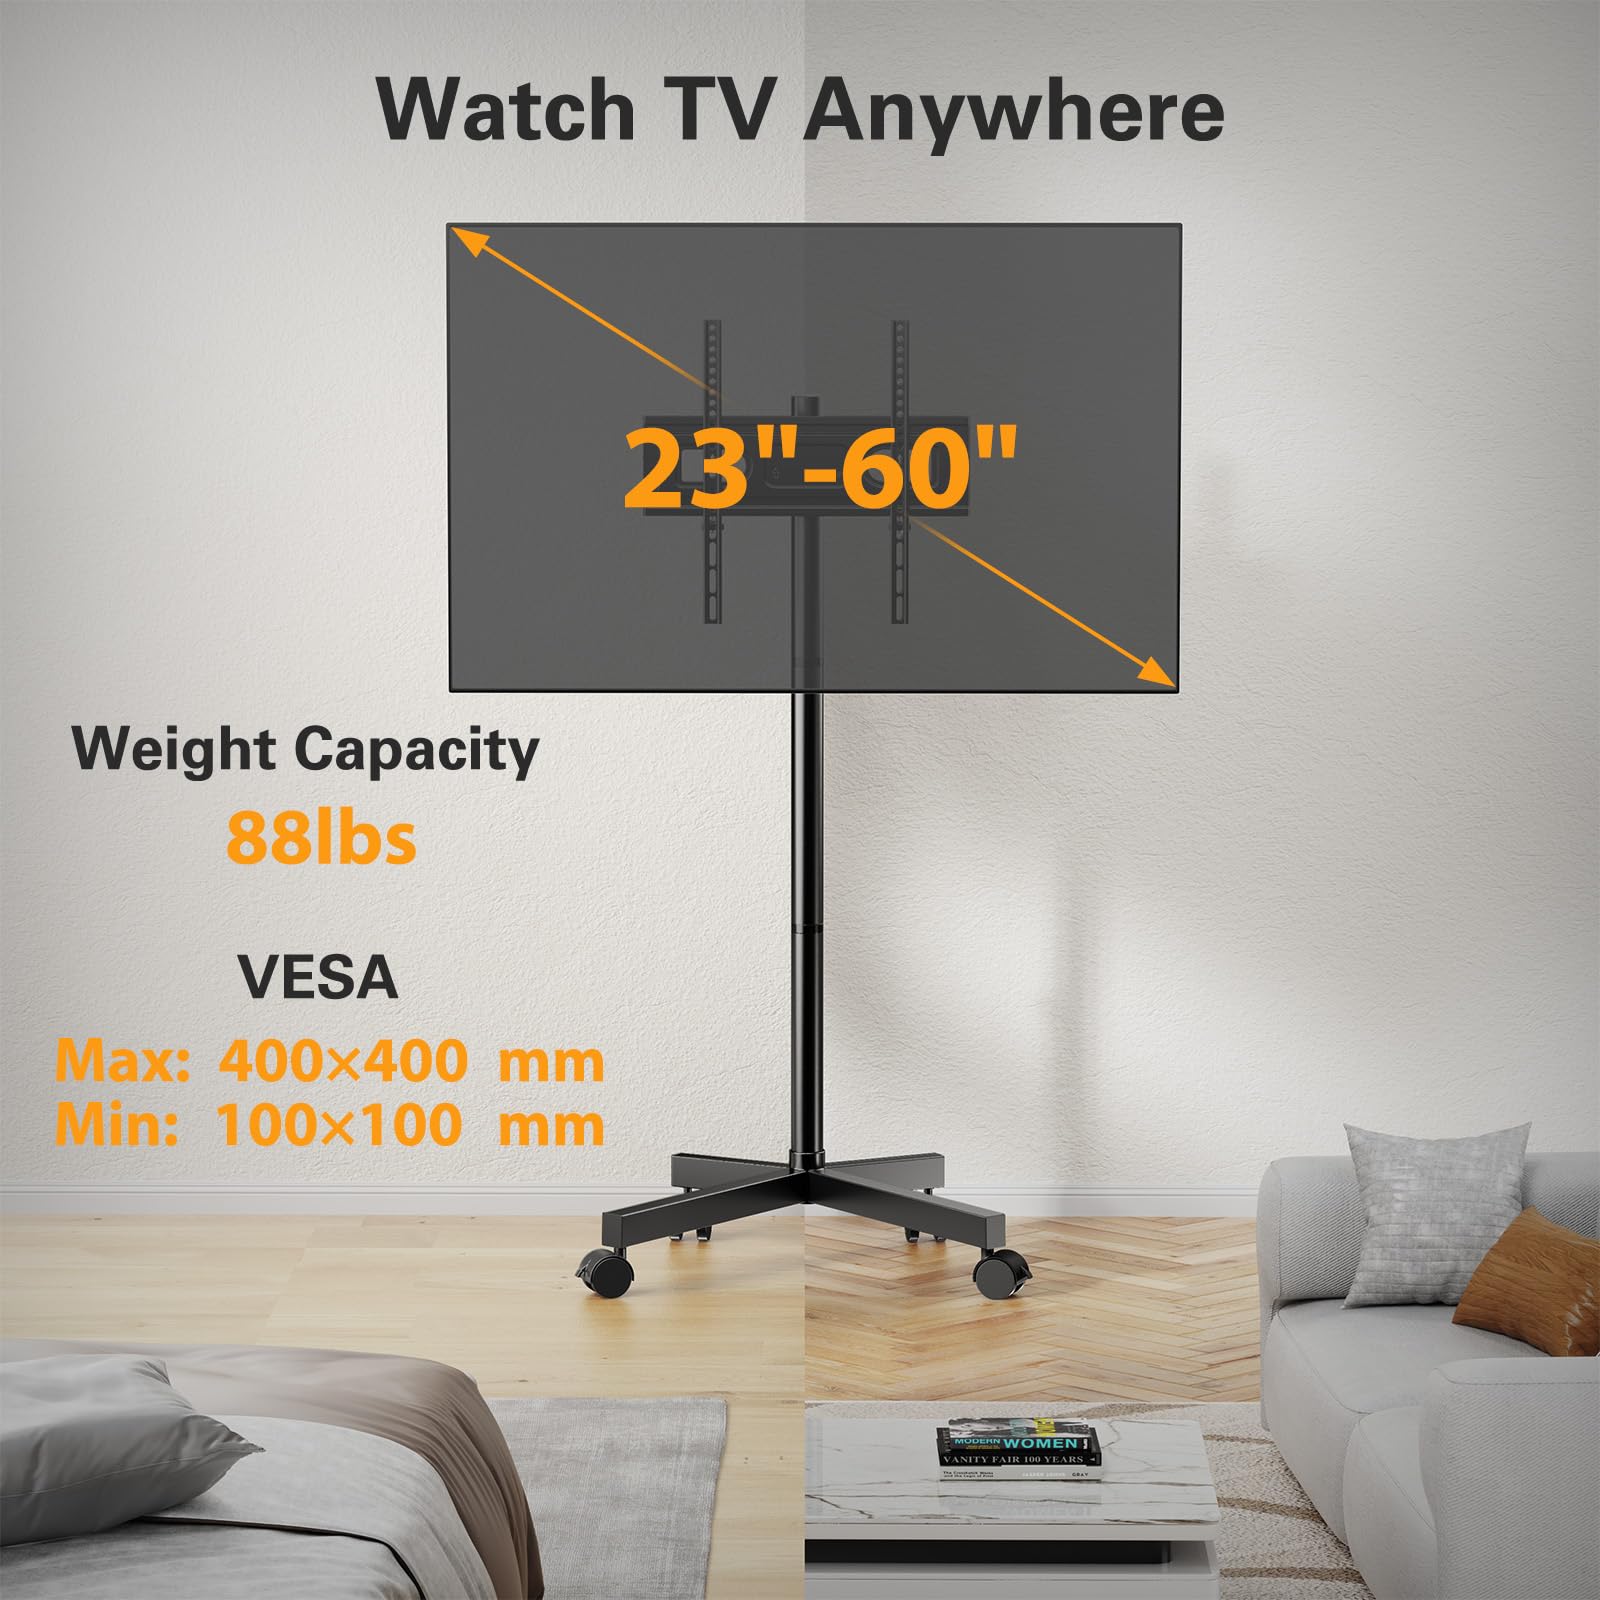 Perlegear Rolling TV Stand for 23-60 Inch LCD LED OLED 4K Smart TVs Holds up to 88lbs, Mobile TV Stand with Height Adjustable, Tilting TV Cart with Locking Wheels Max VESA 400x400mm, PGTVMC16